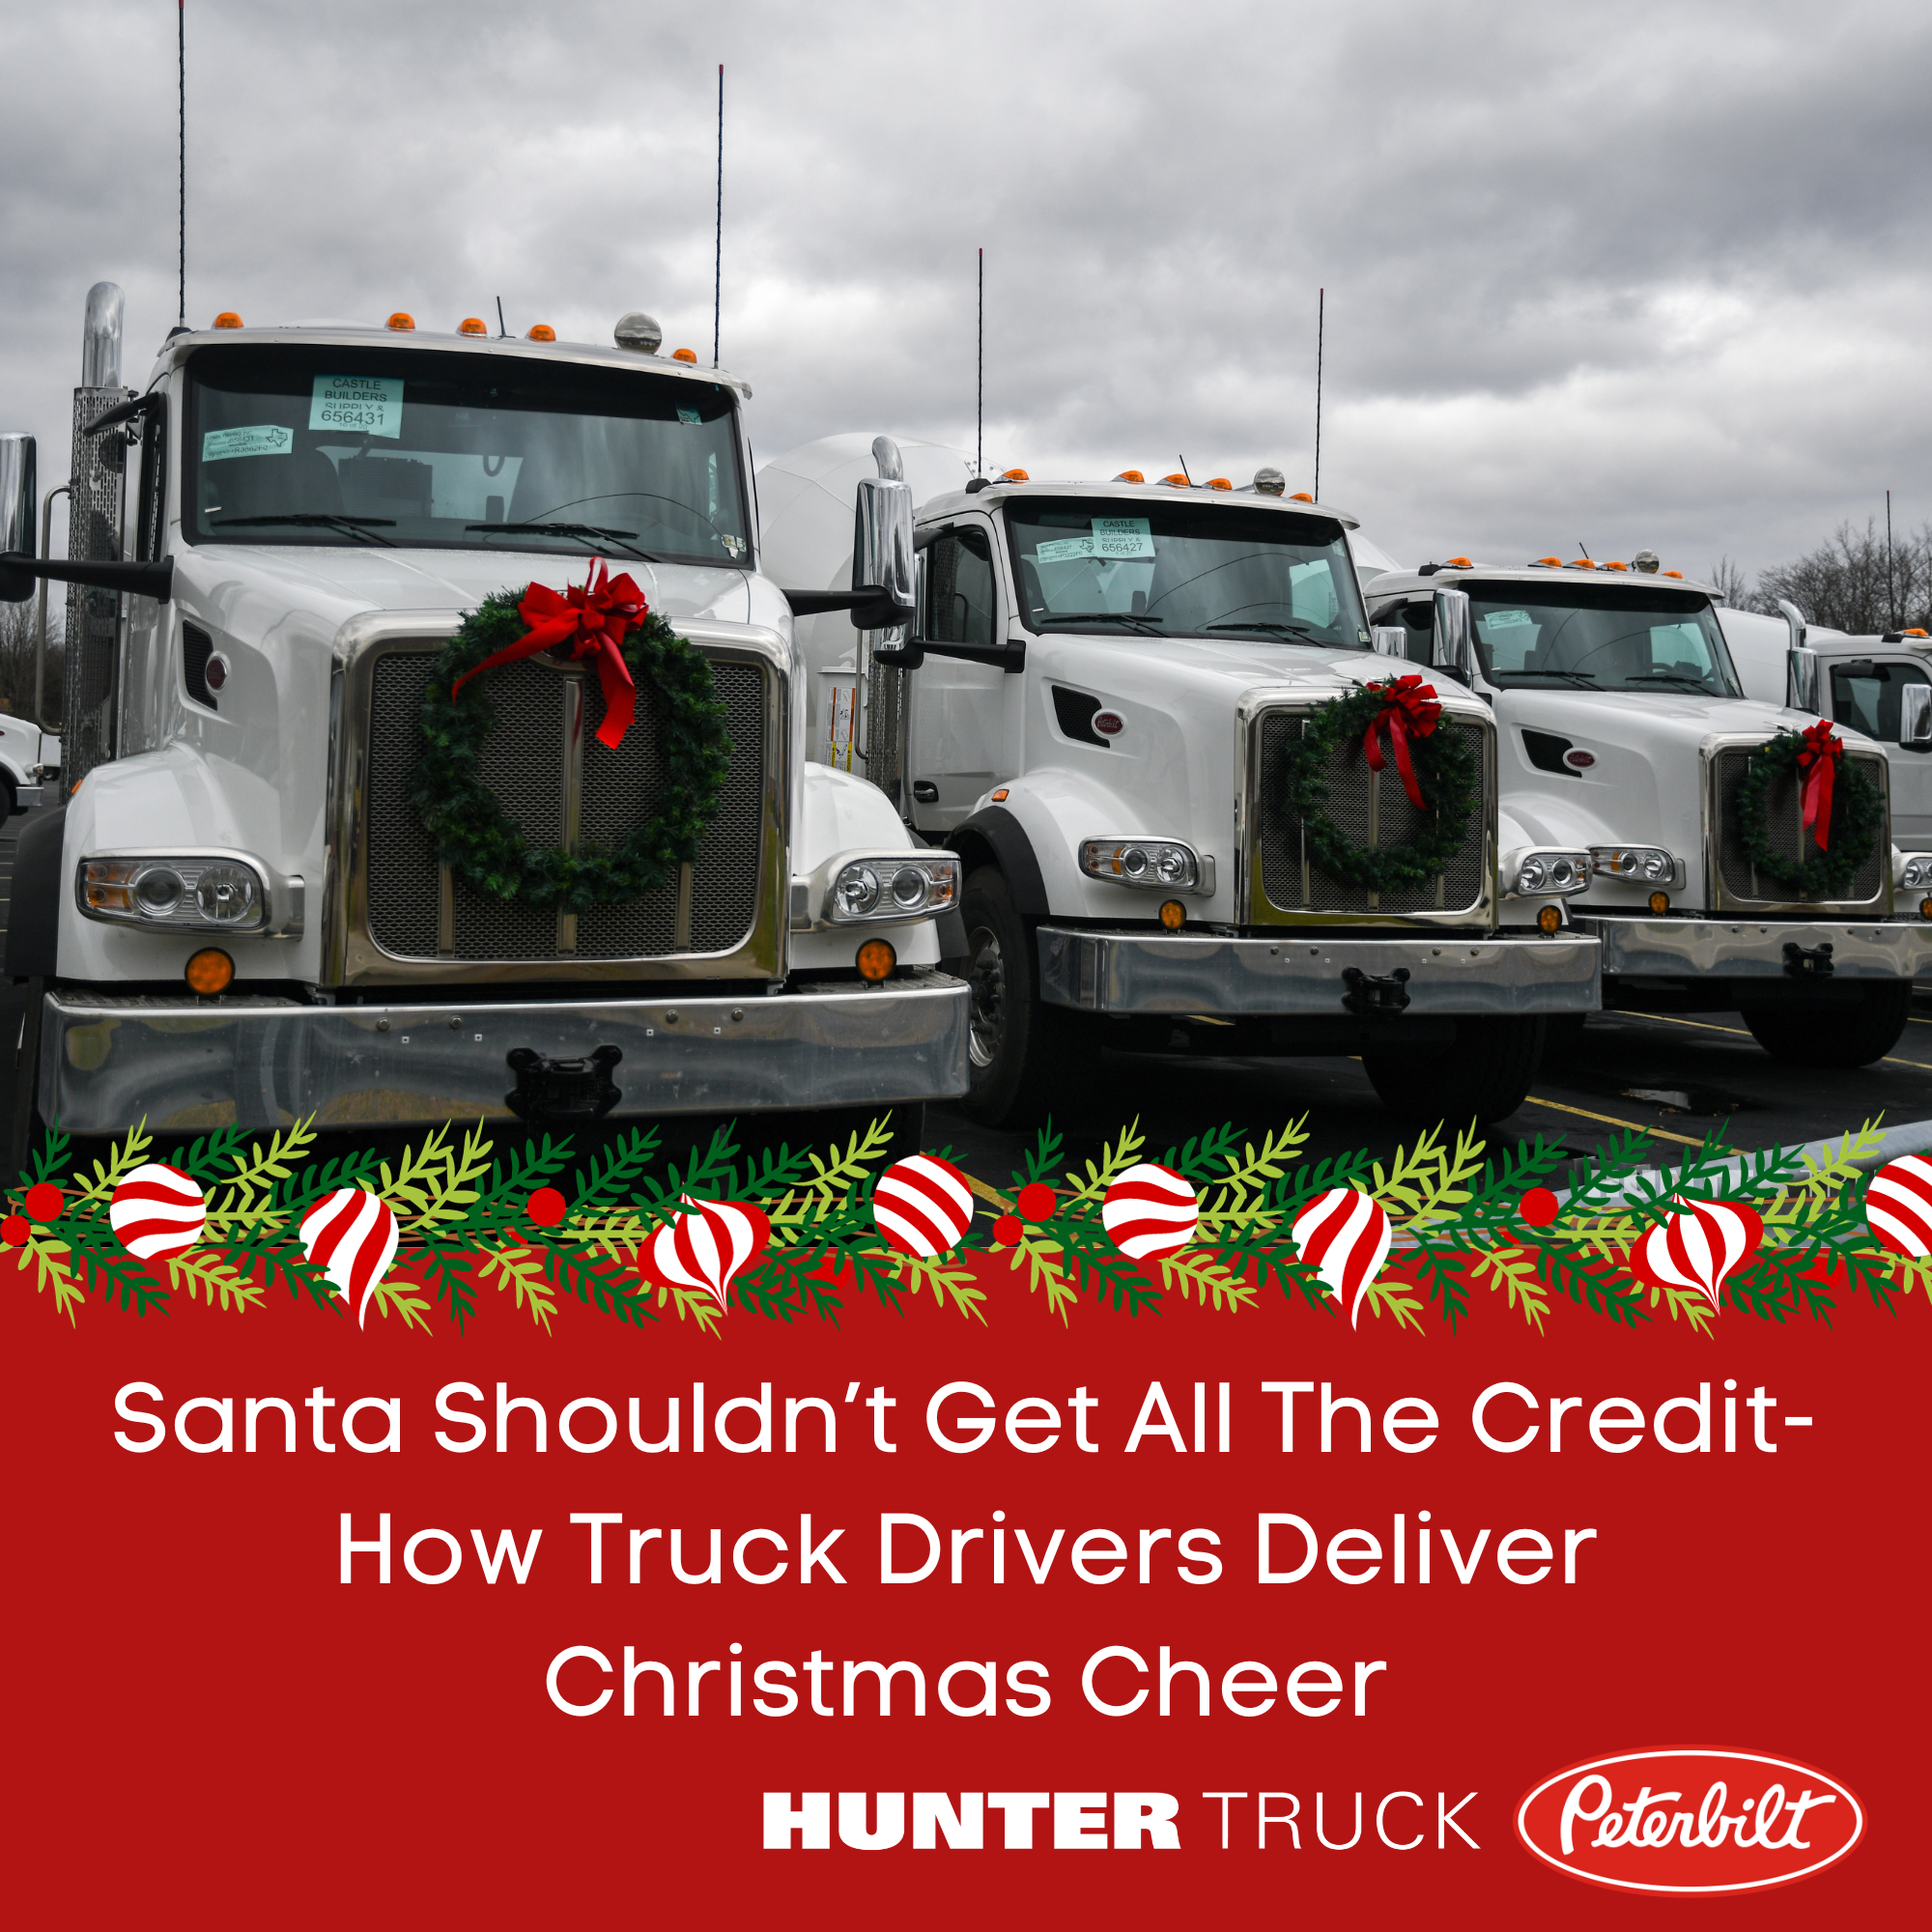 Santa Shouldn’t Get All The Credit- How Truck Drivers Deliver Christmas Cheer